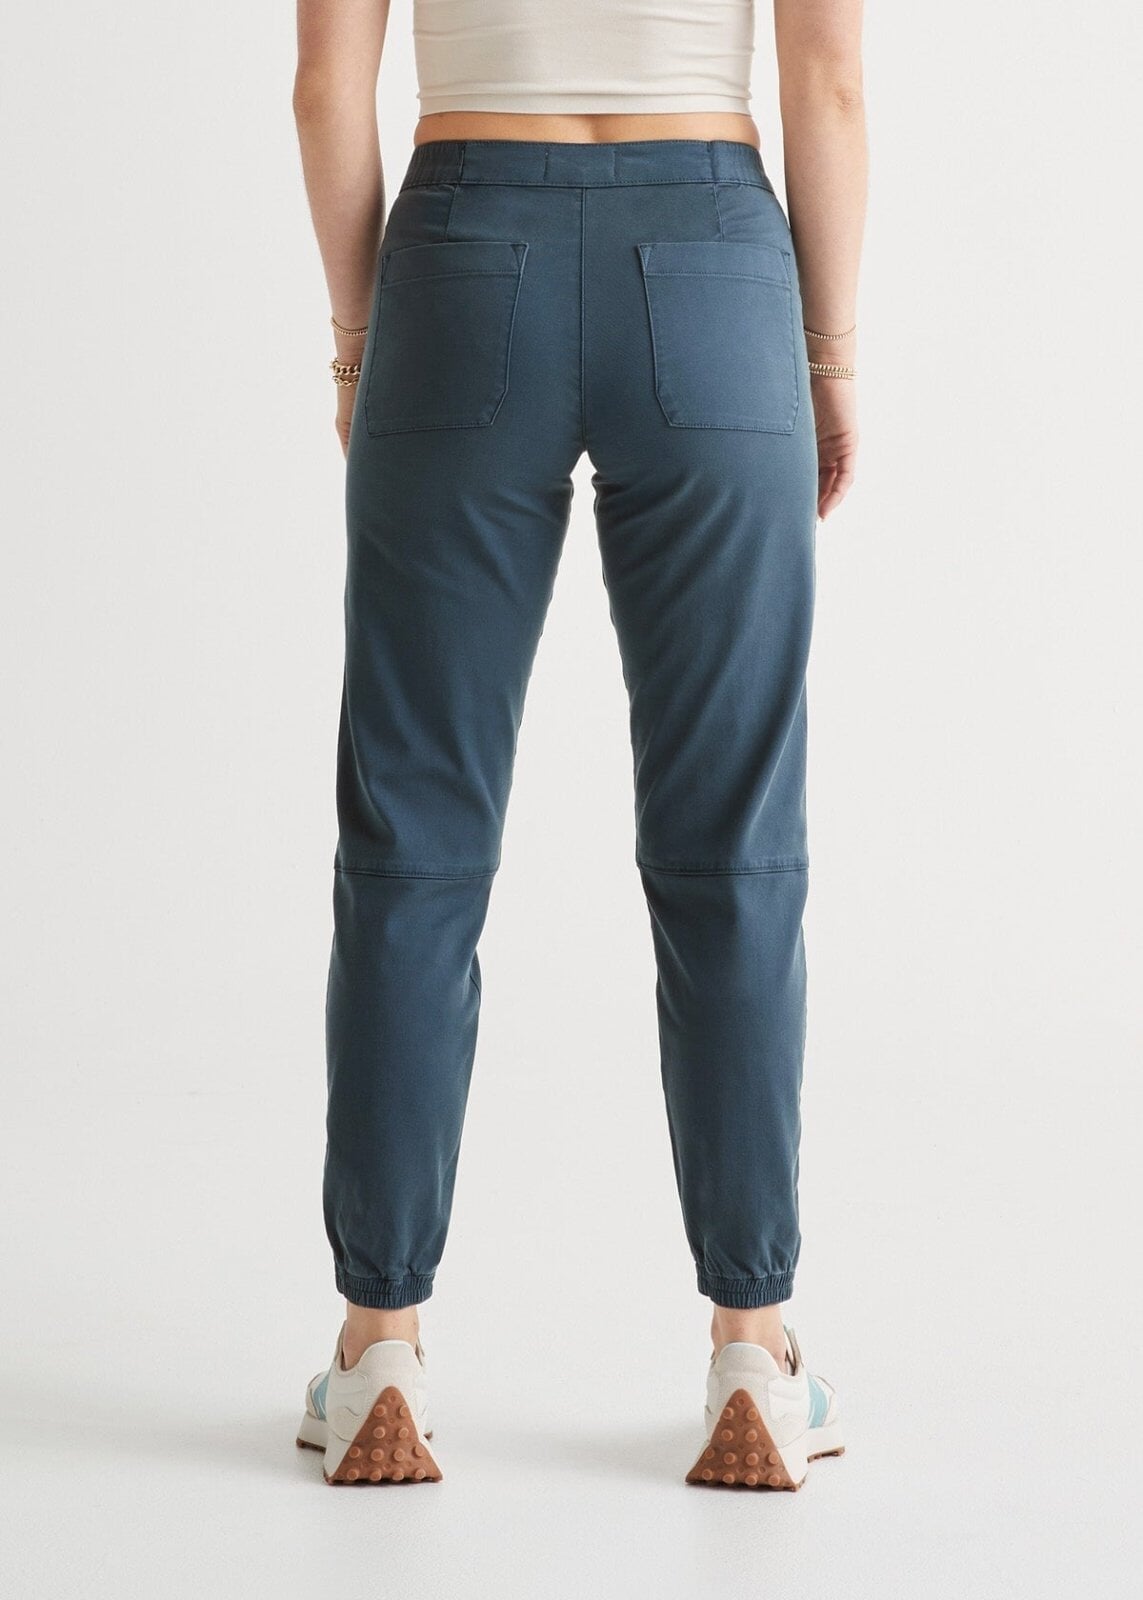 Women's High Rise Blue Athletic Jogger